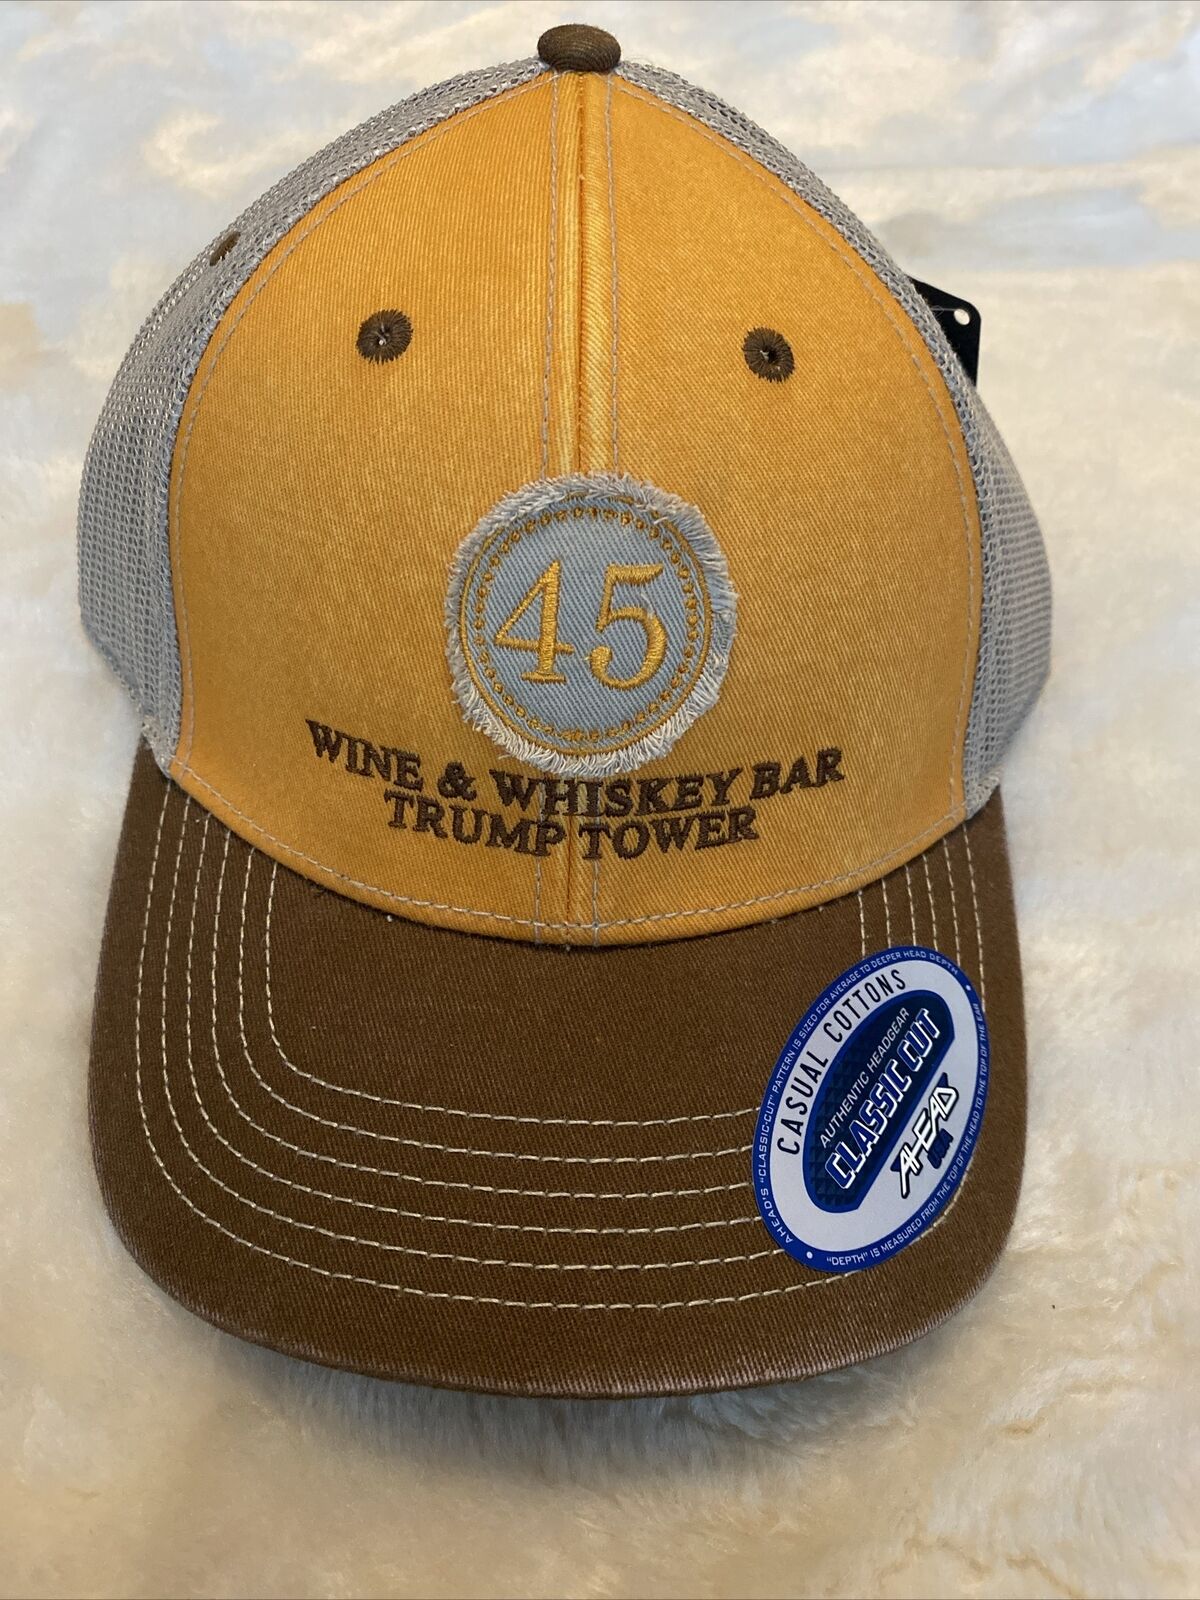 Trump Tower 45th President Yellow Hat Wine Whiskey Bar Not Available Public RARE